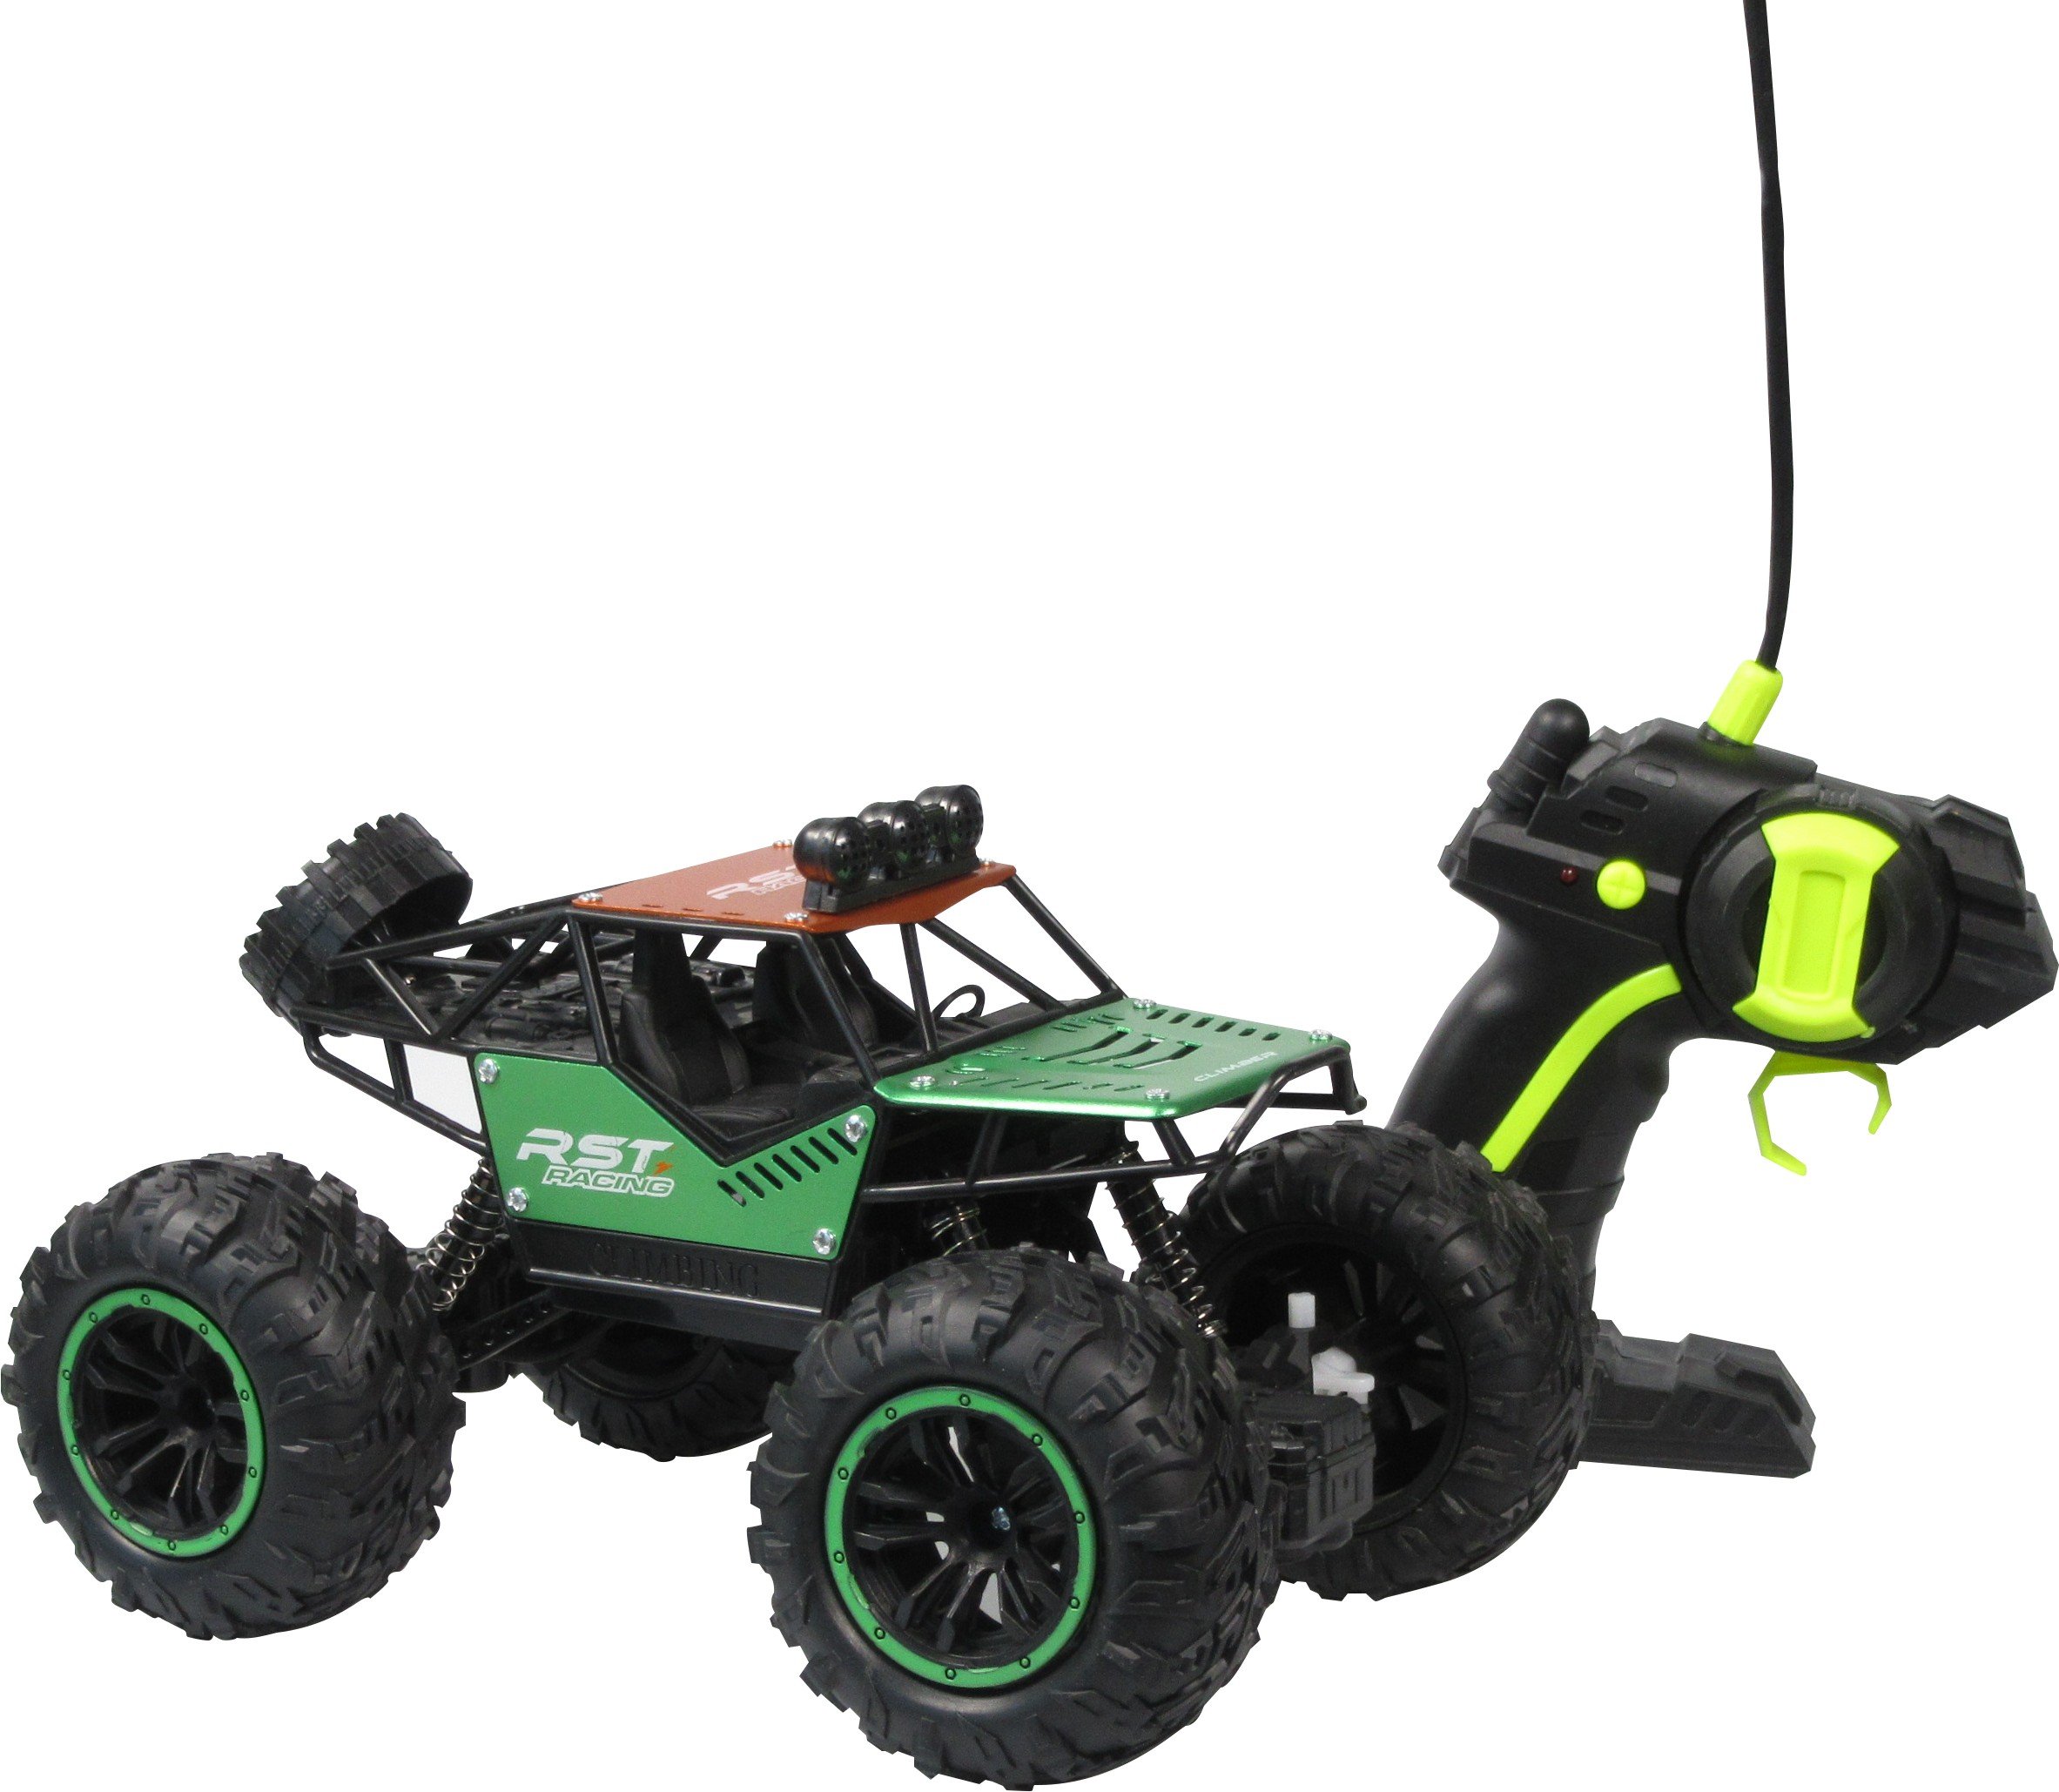 https://www.phonelook.ch/image/data/prod/RC_Off-Road_Monster_Truck_RTR_4x4_AWD_37V_Rover_RST_Racing_Vert_RC_Off-Road_Monster_Truck_RTR_4x4_AWD_37V_Rover_RST_Racing_Grun.jpg